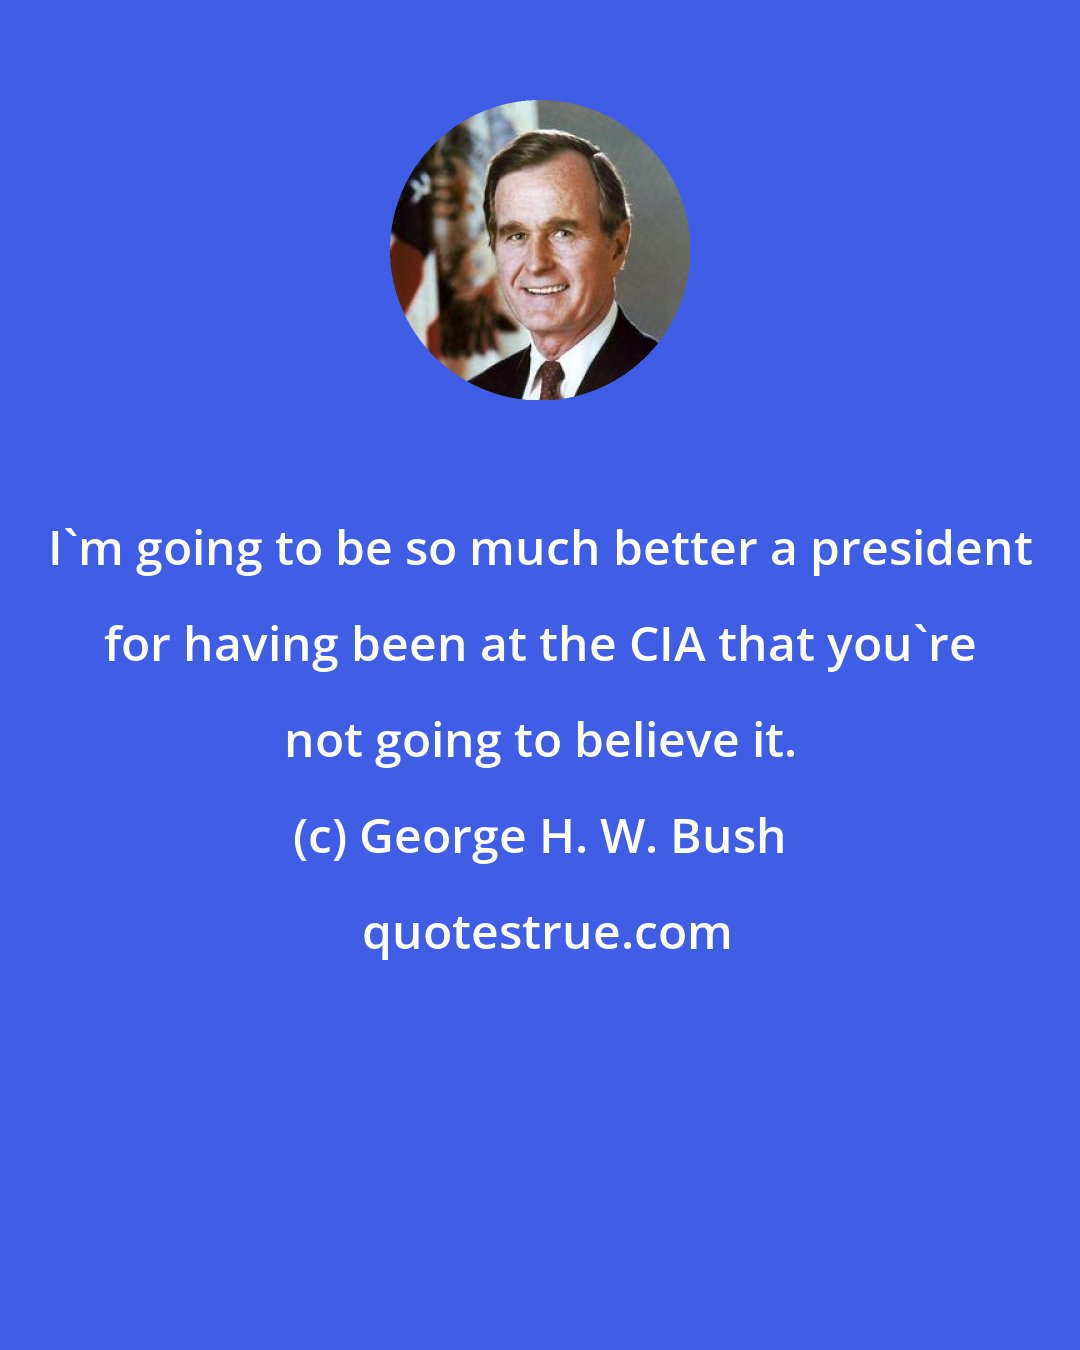 George H. W. Bush: I'm going to be so much better a president for having been at the CIA that you're not going to believe it.